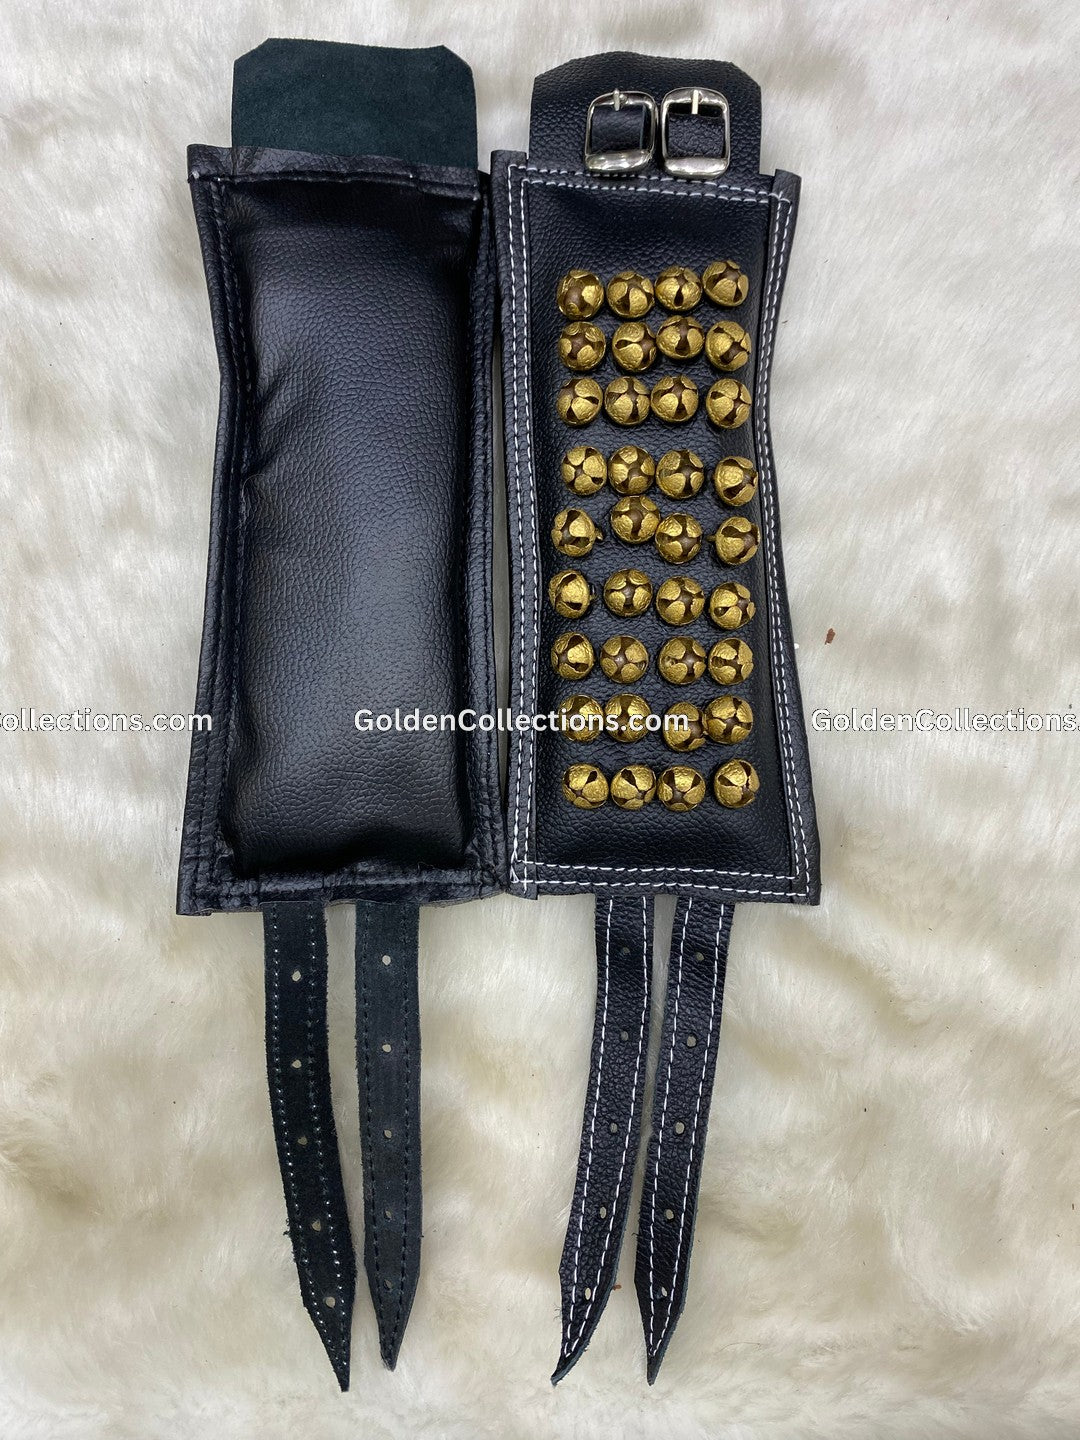 4-Line-Black-Leather-Ghungroo-Salangai-GoldenCollections-2